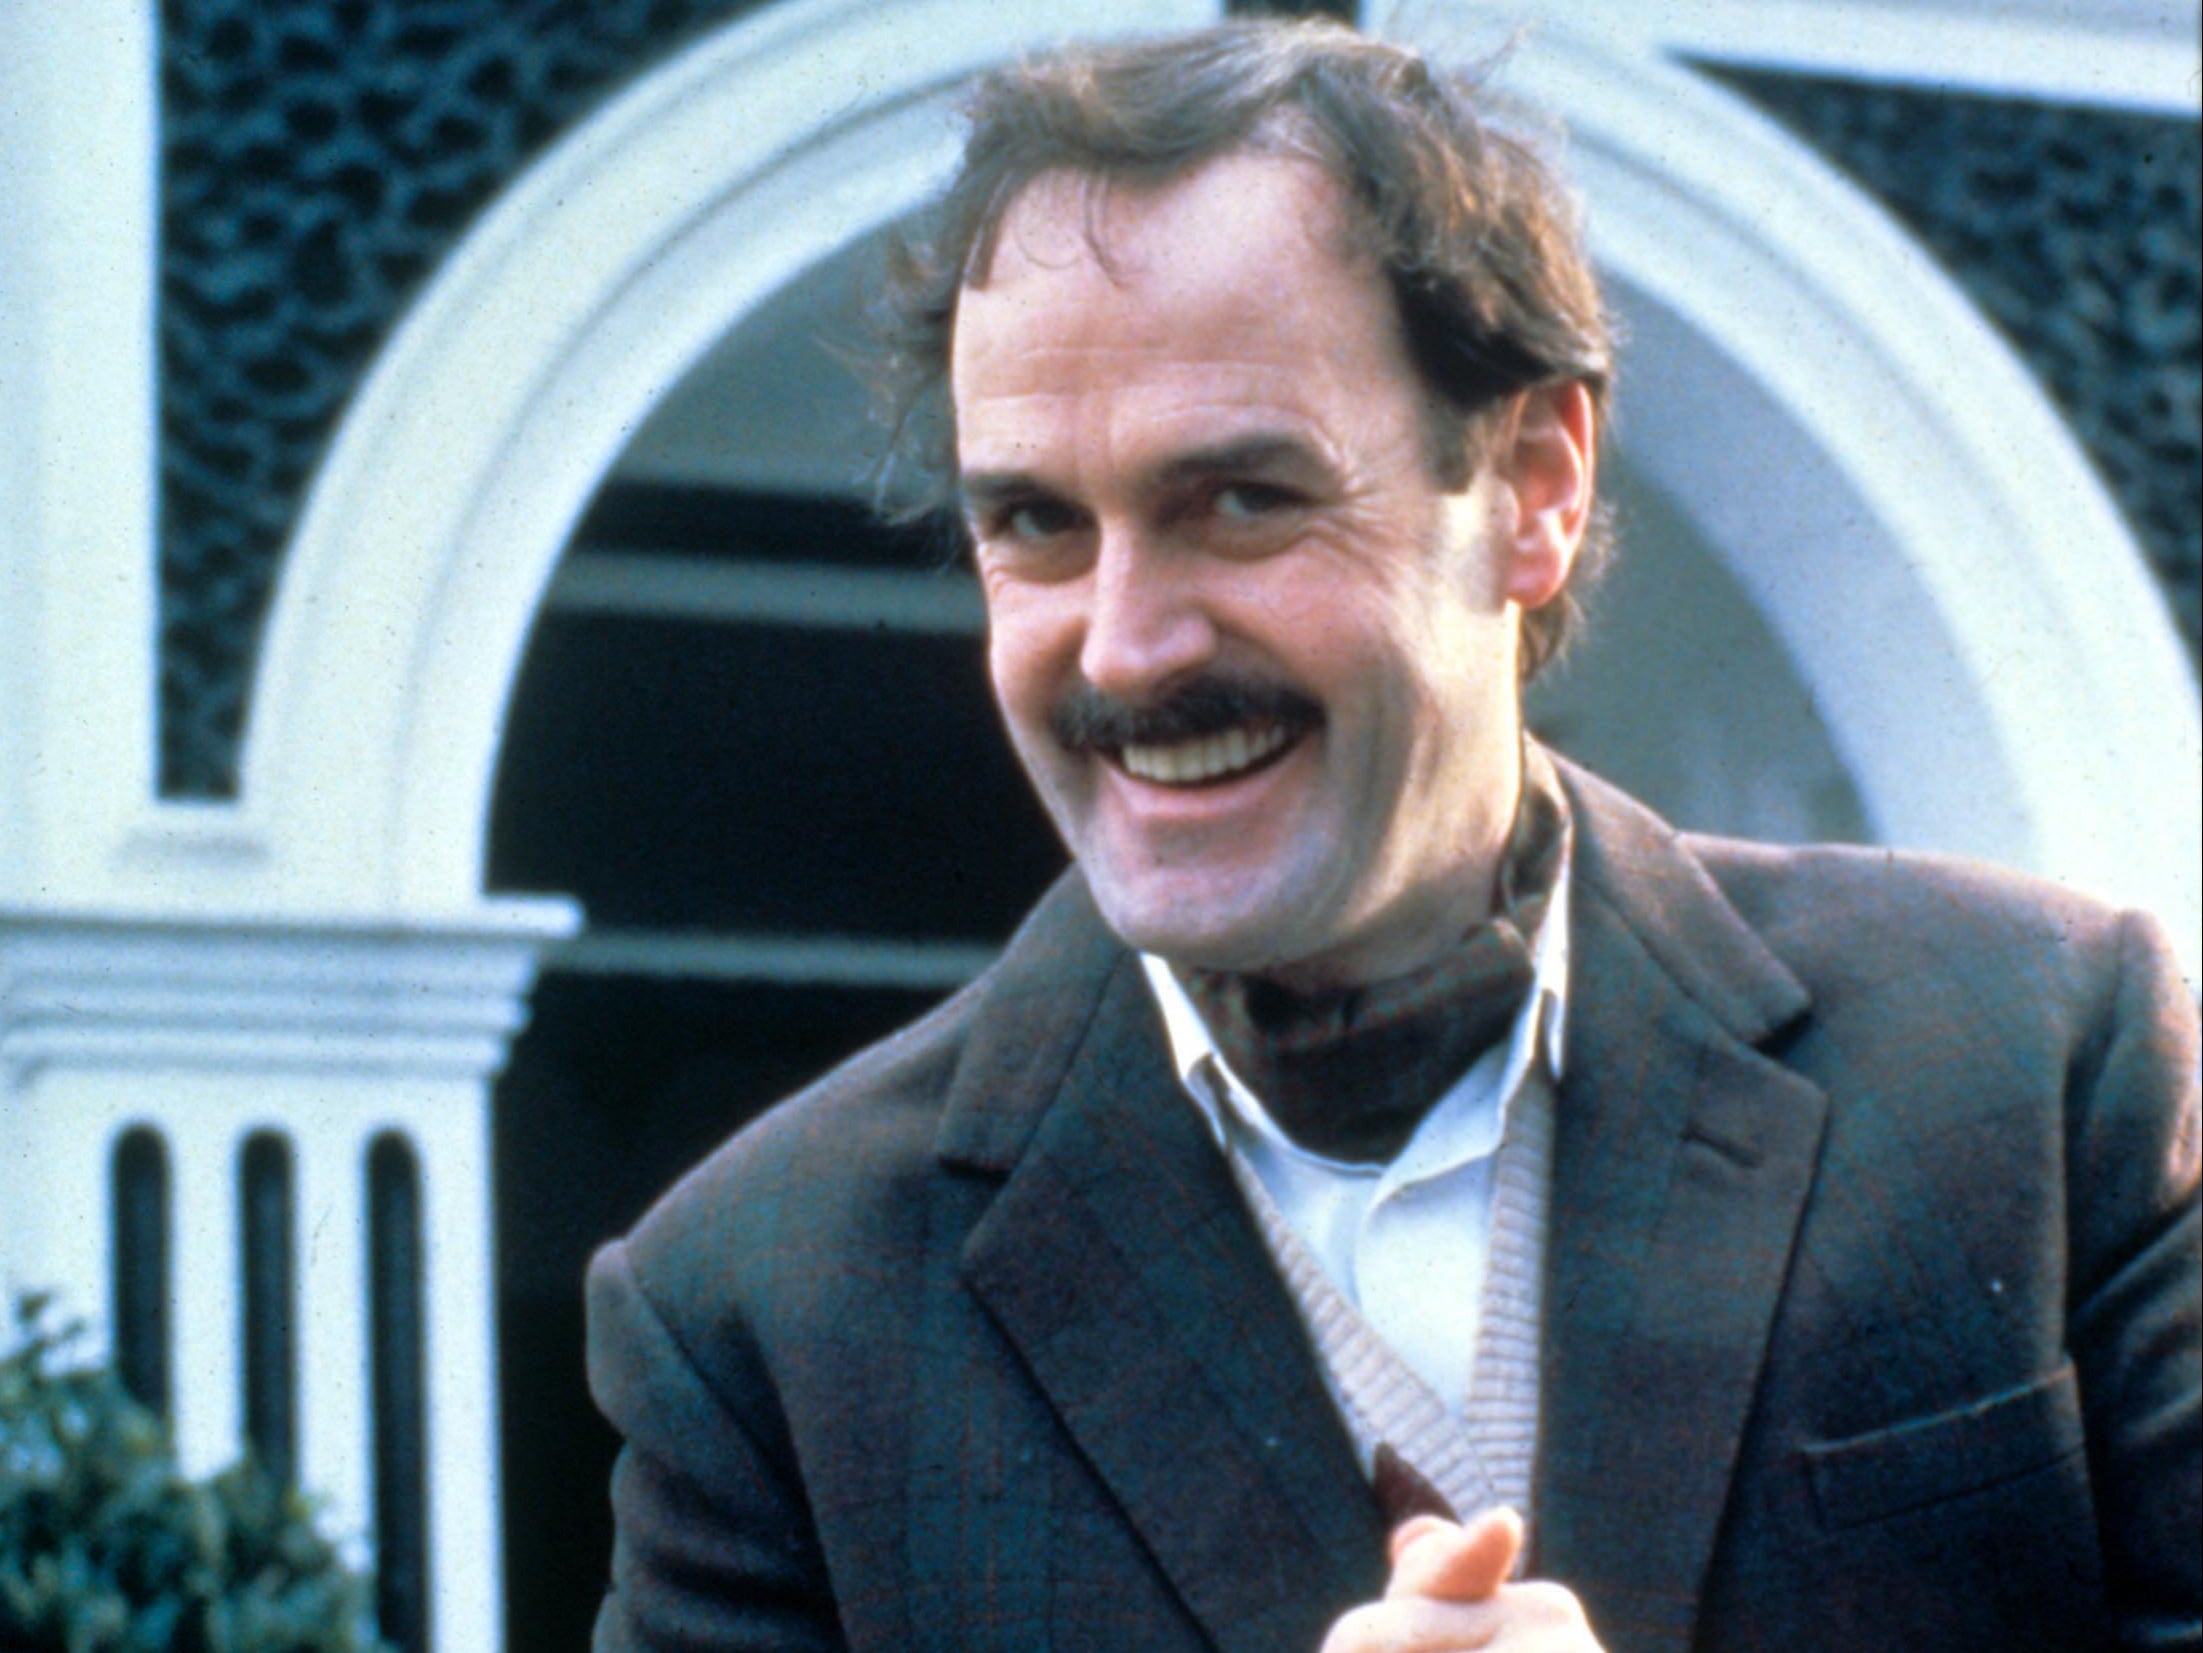 ‘Fawlty Towers’ originally aired on the BBC back in the 1970s